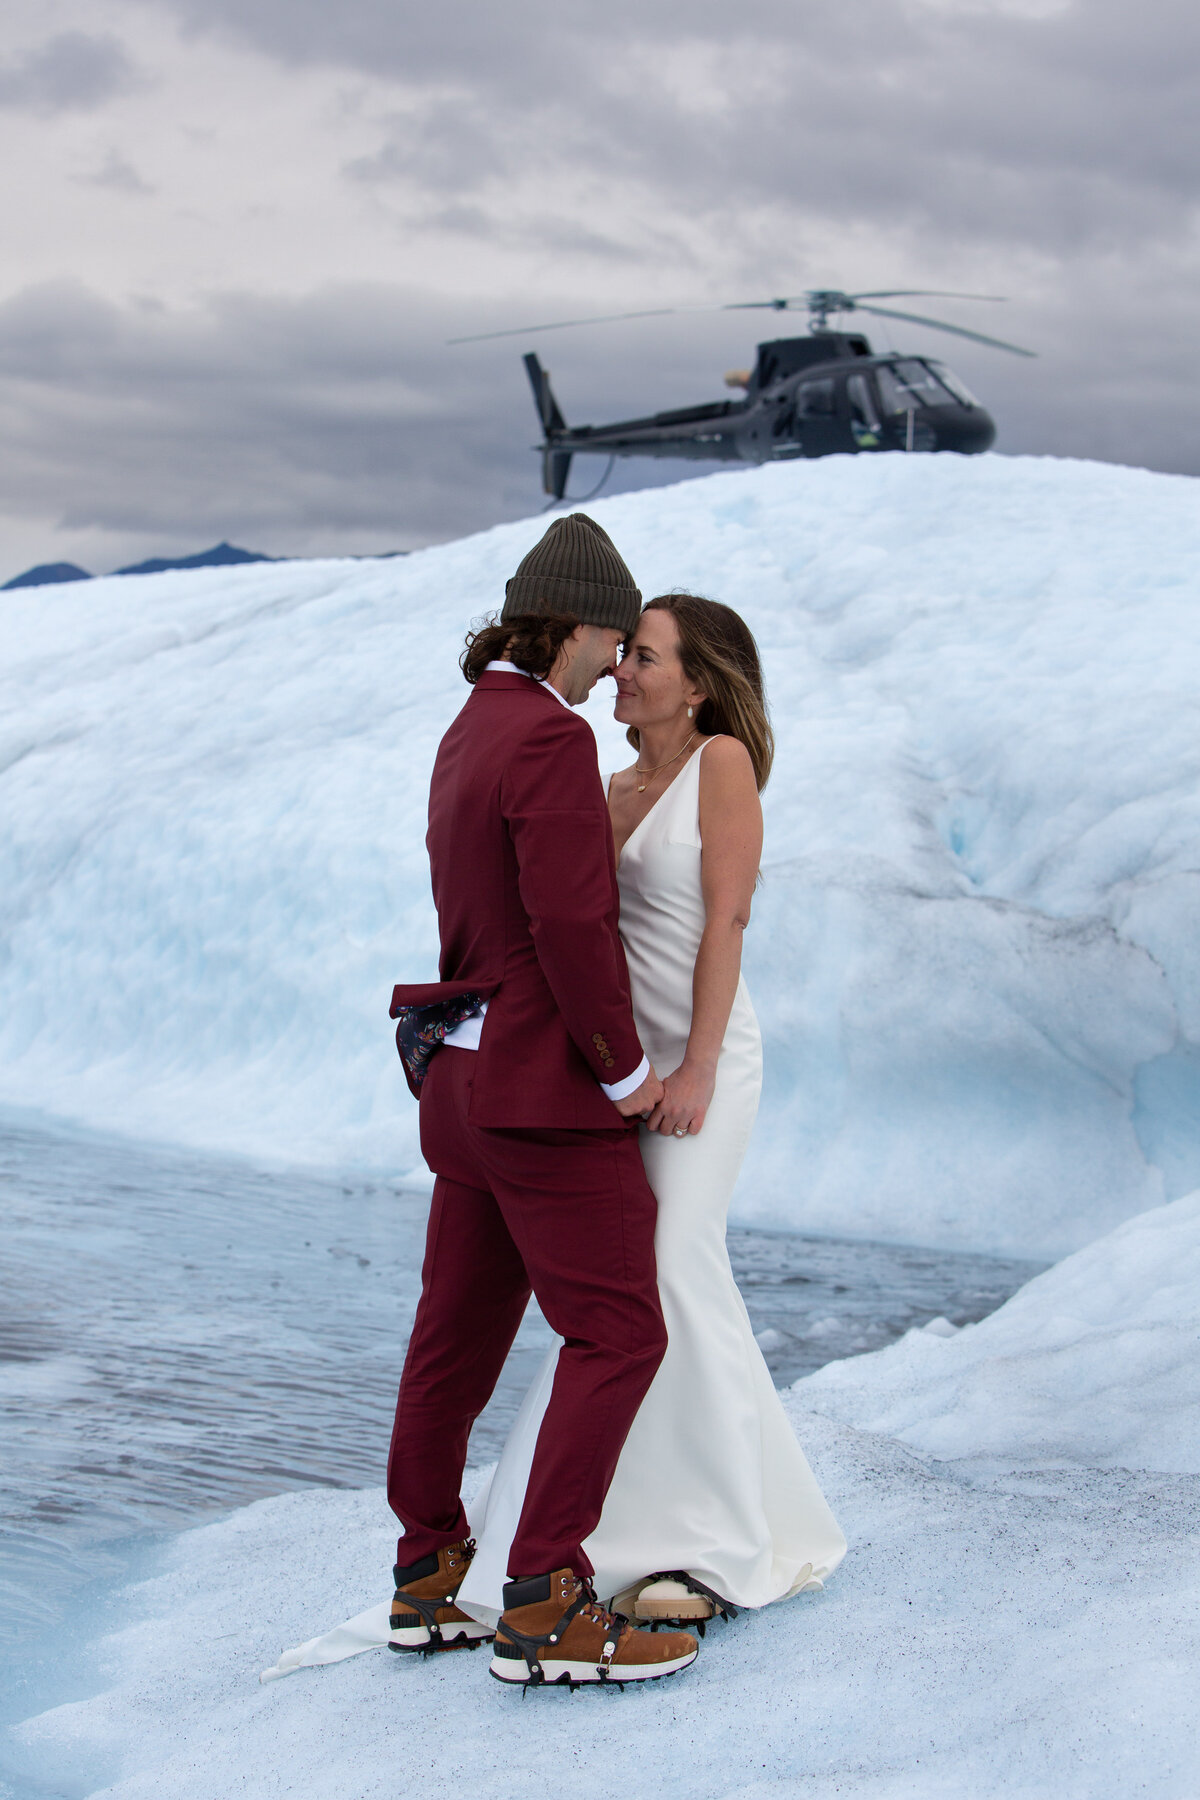 A bride and groom stand with their foreheads touching and holding hands on a glacier in Alaska with a helicopter parked on the ice behind them.